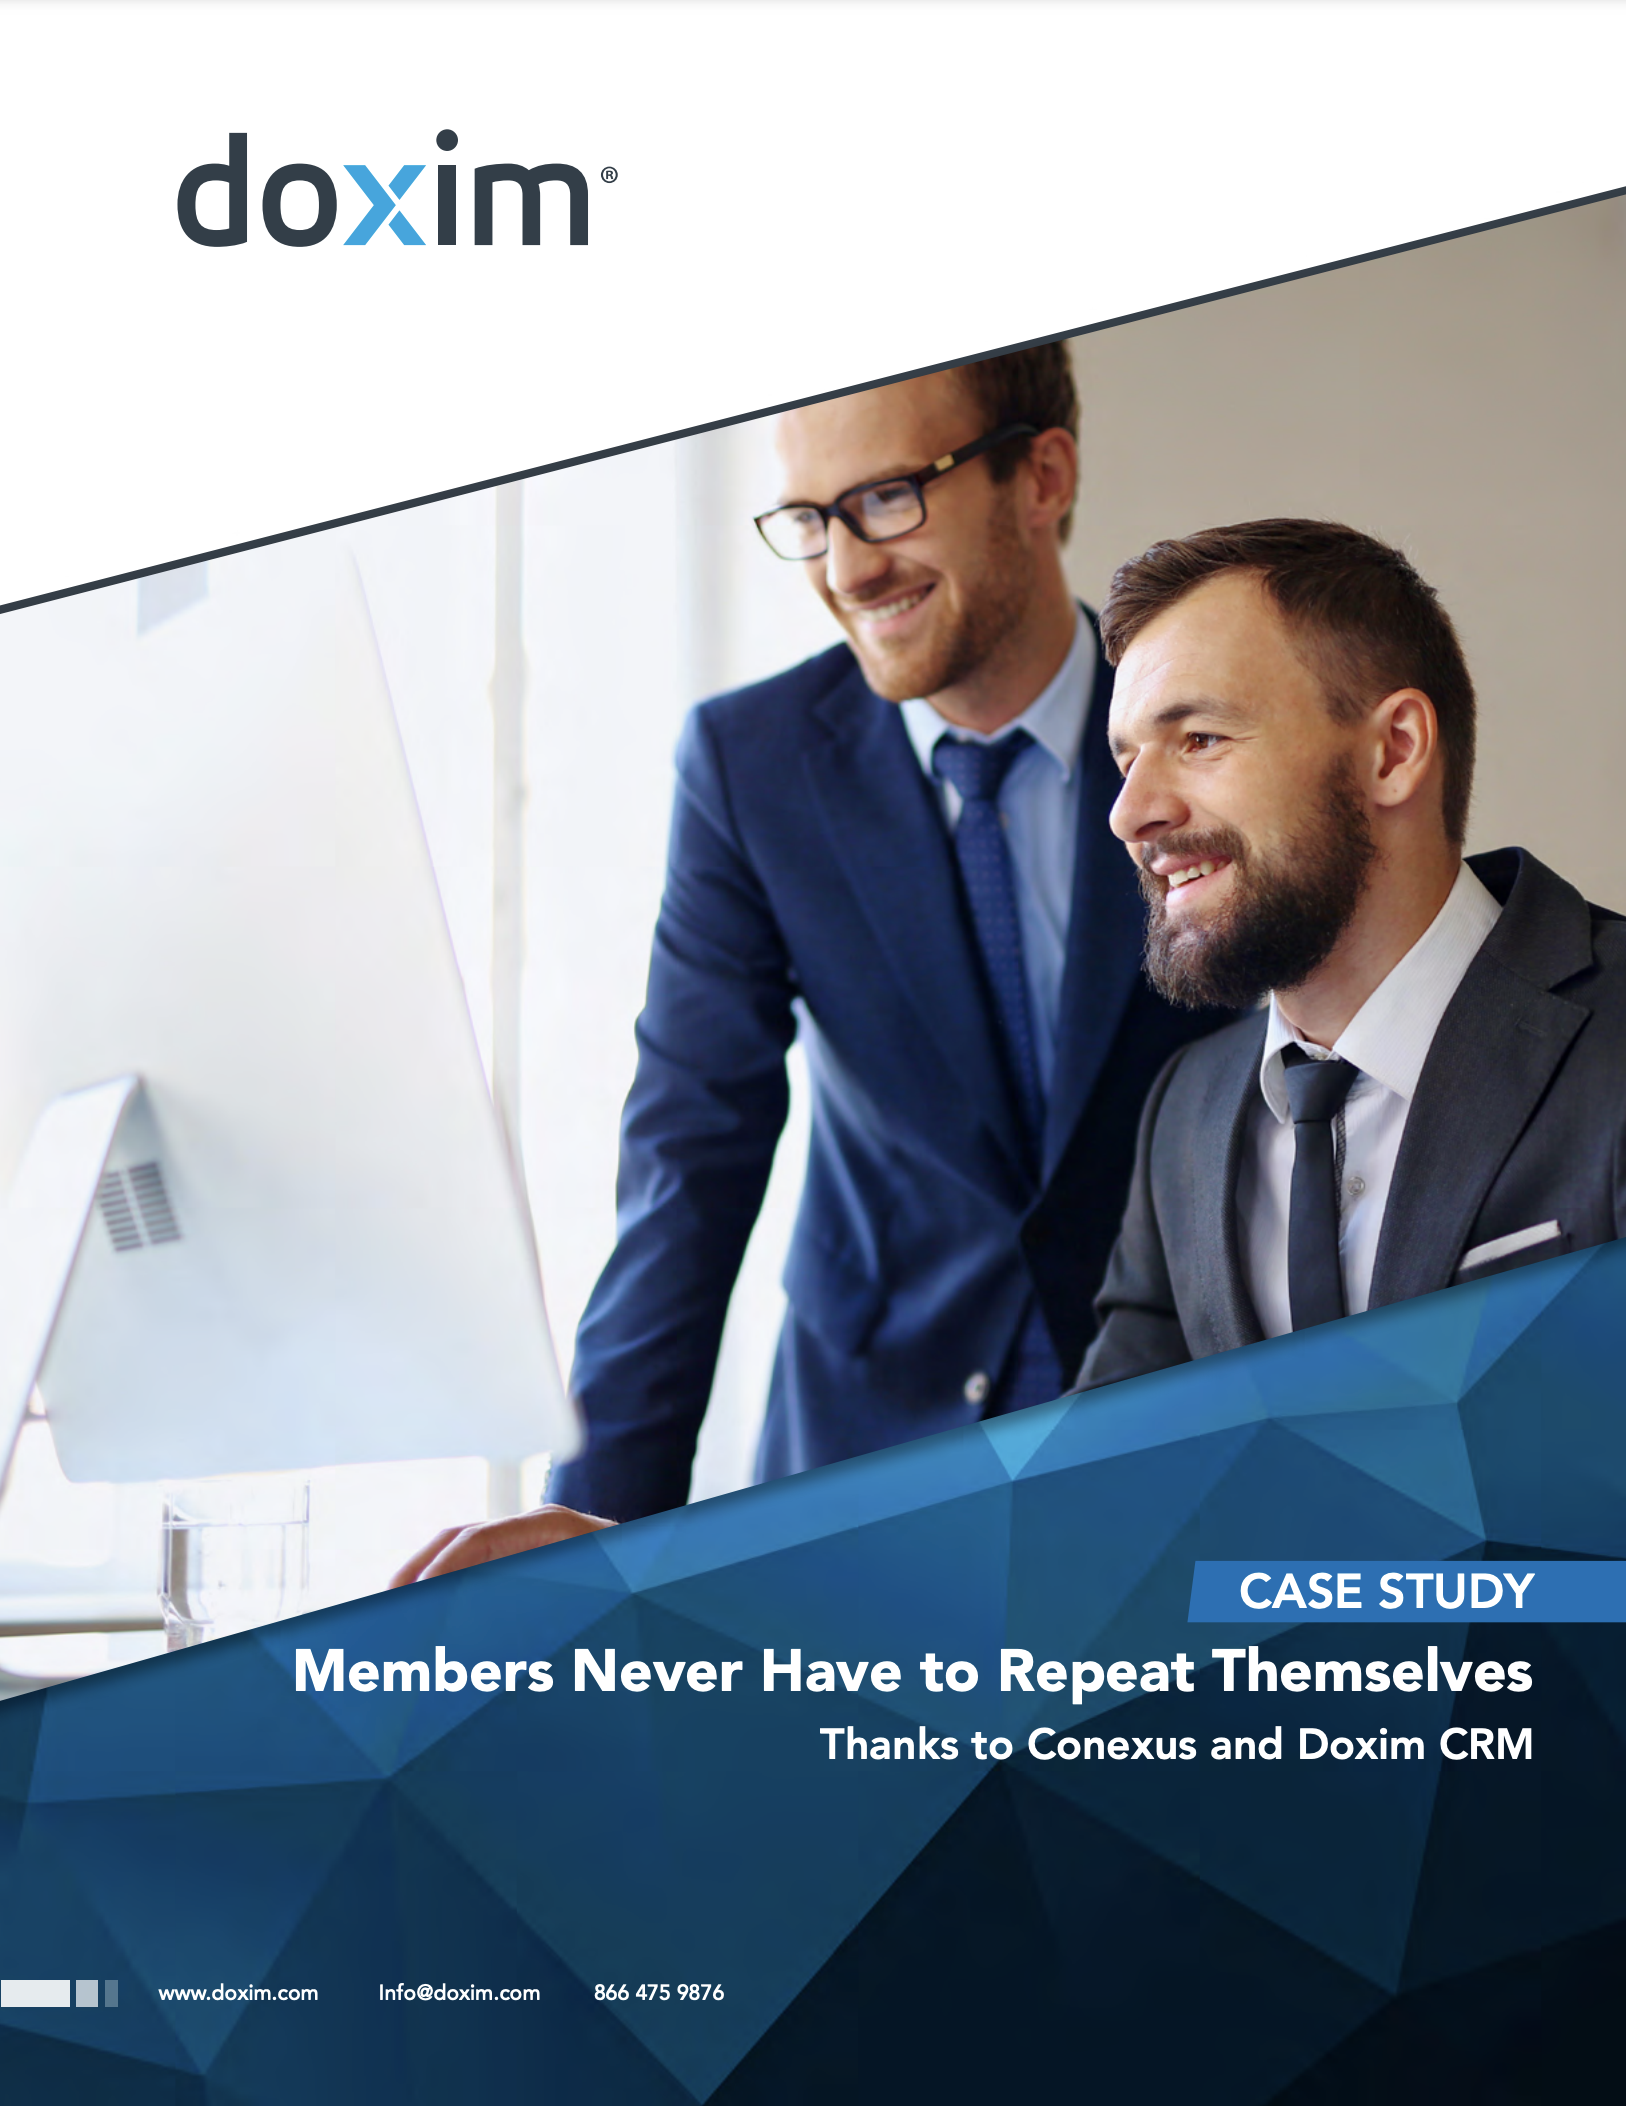 case study: Members Never Have to Repeat Themselves Thanks to Conexus and Doxim CRM